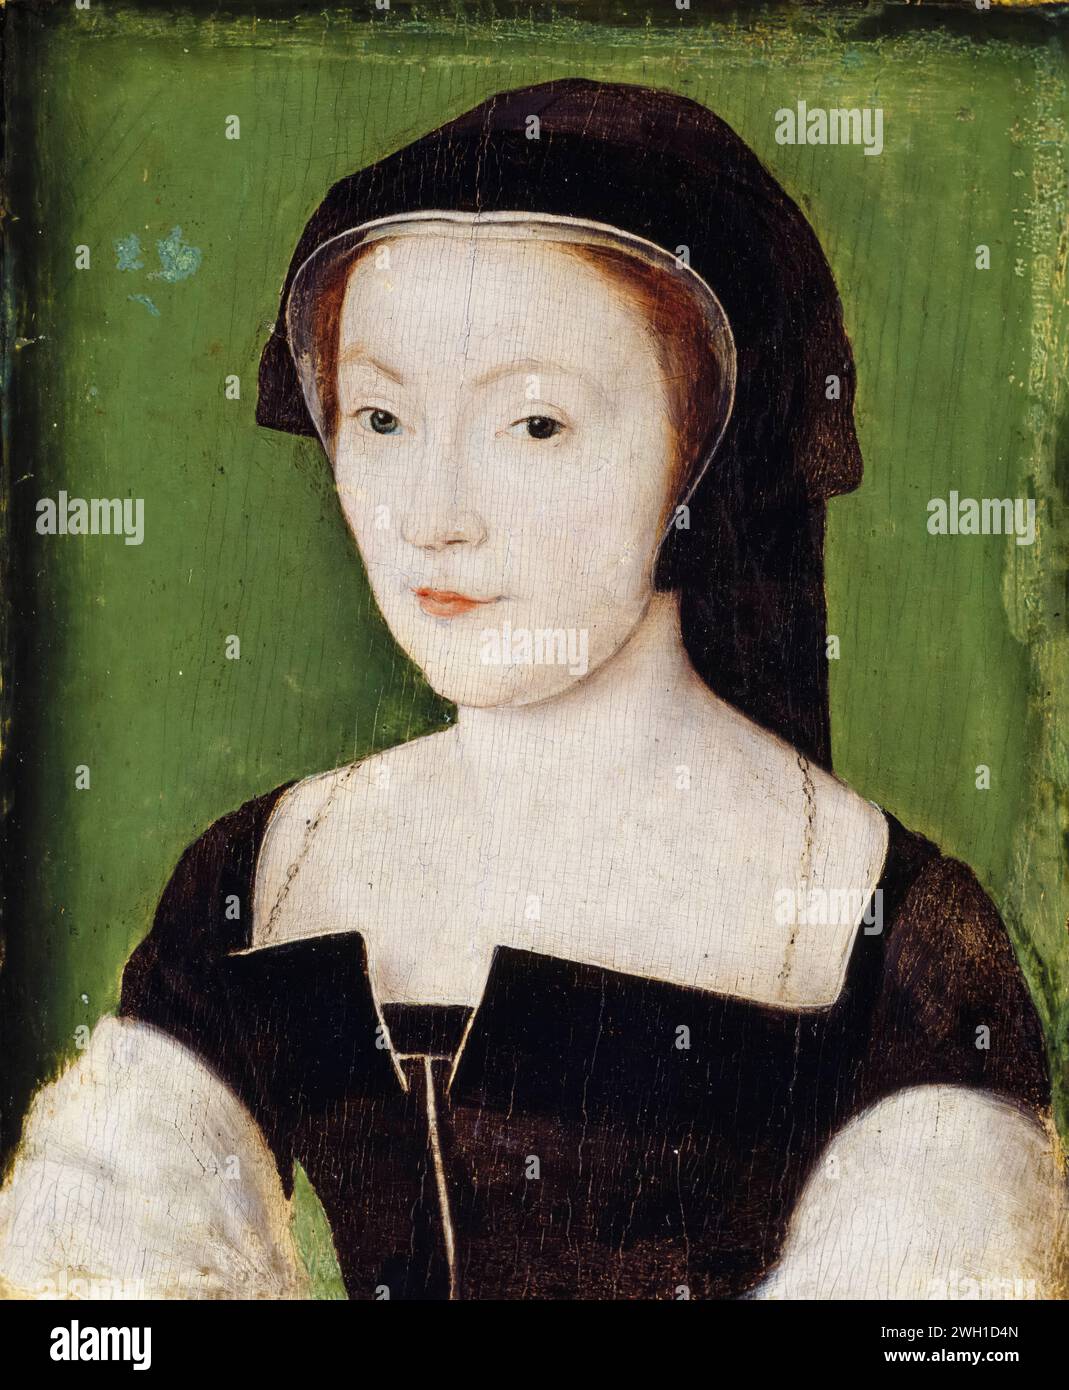 Mary of Guise (1515-1560), also called Mary of Lorraine, Queen Consort of Scotland (1538-1542), portrait painting in oil on panel by Corneille de Lyon (attributed), circa 1537 Stock Photo